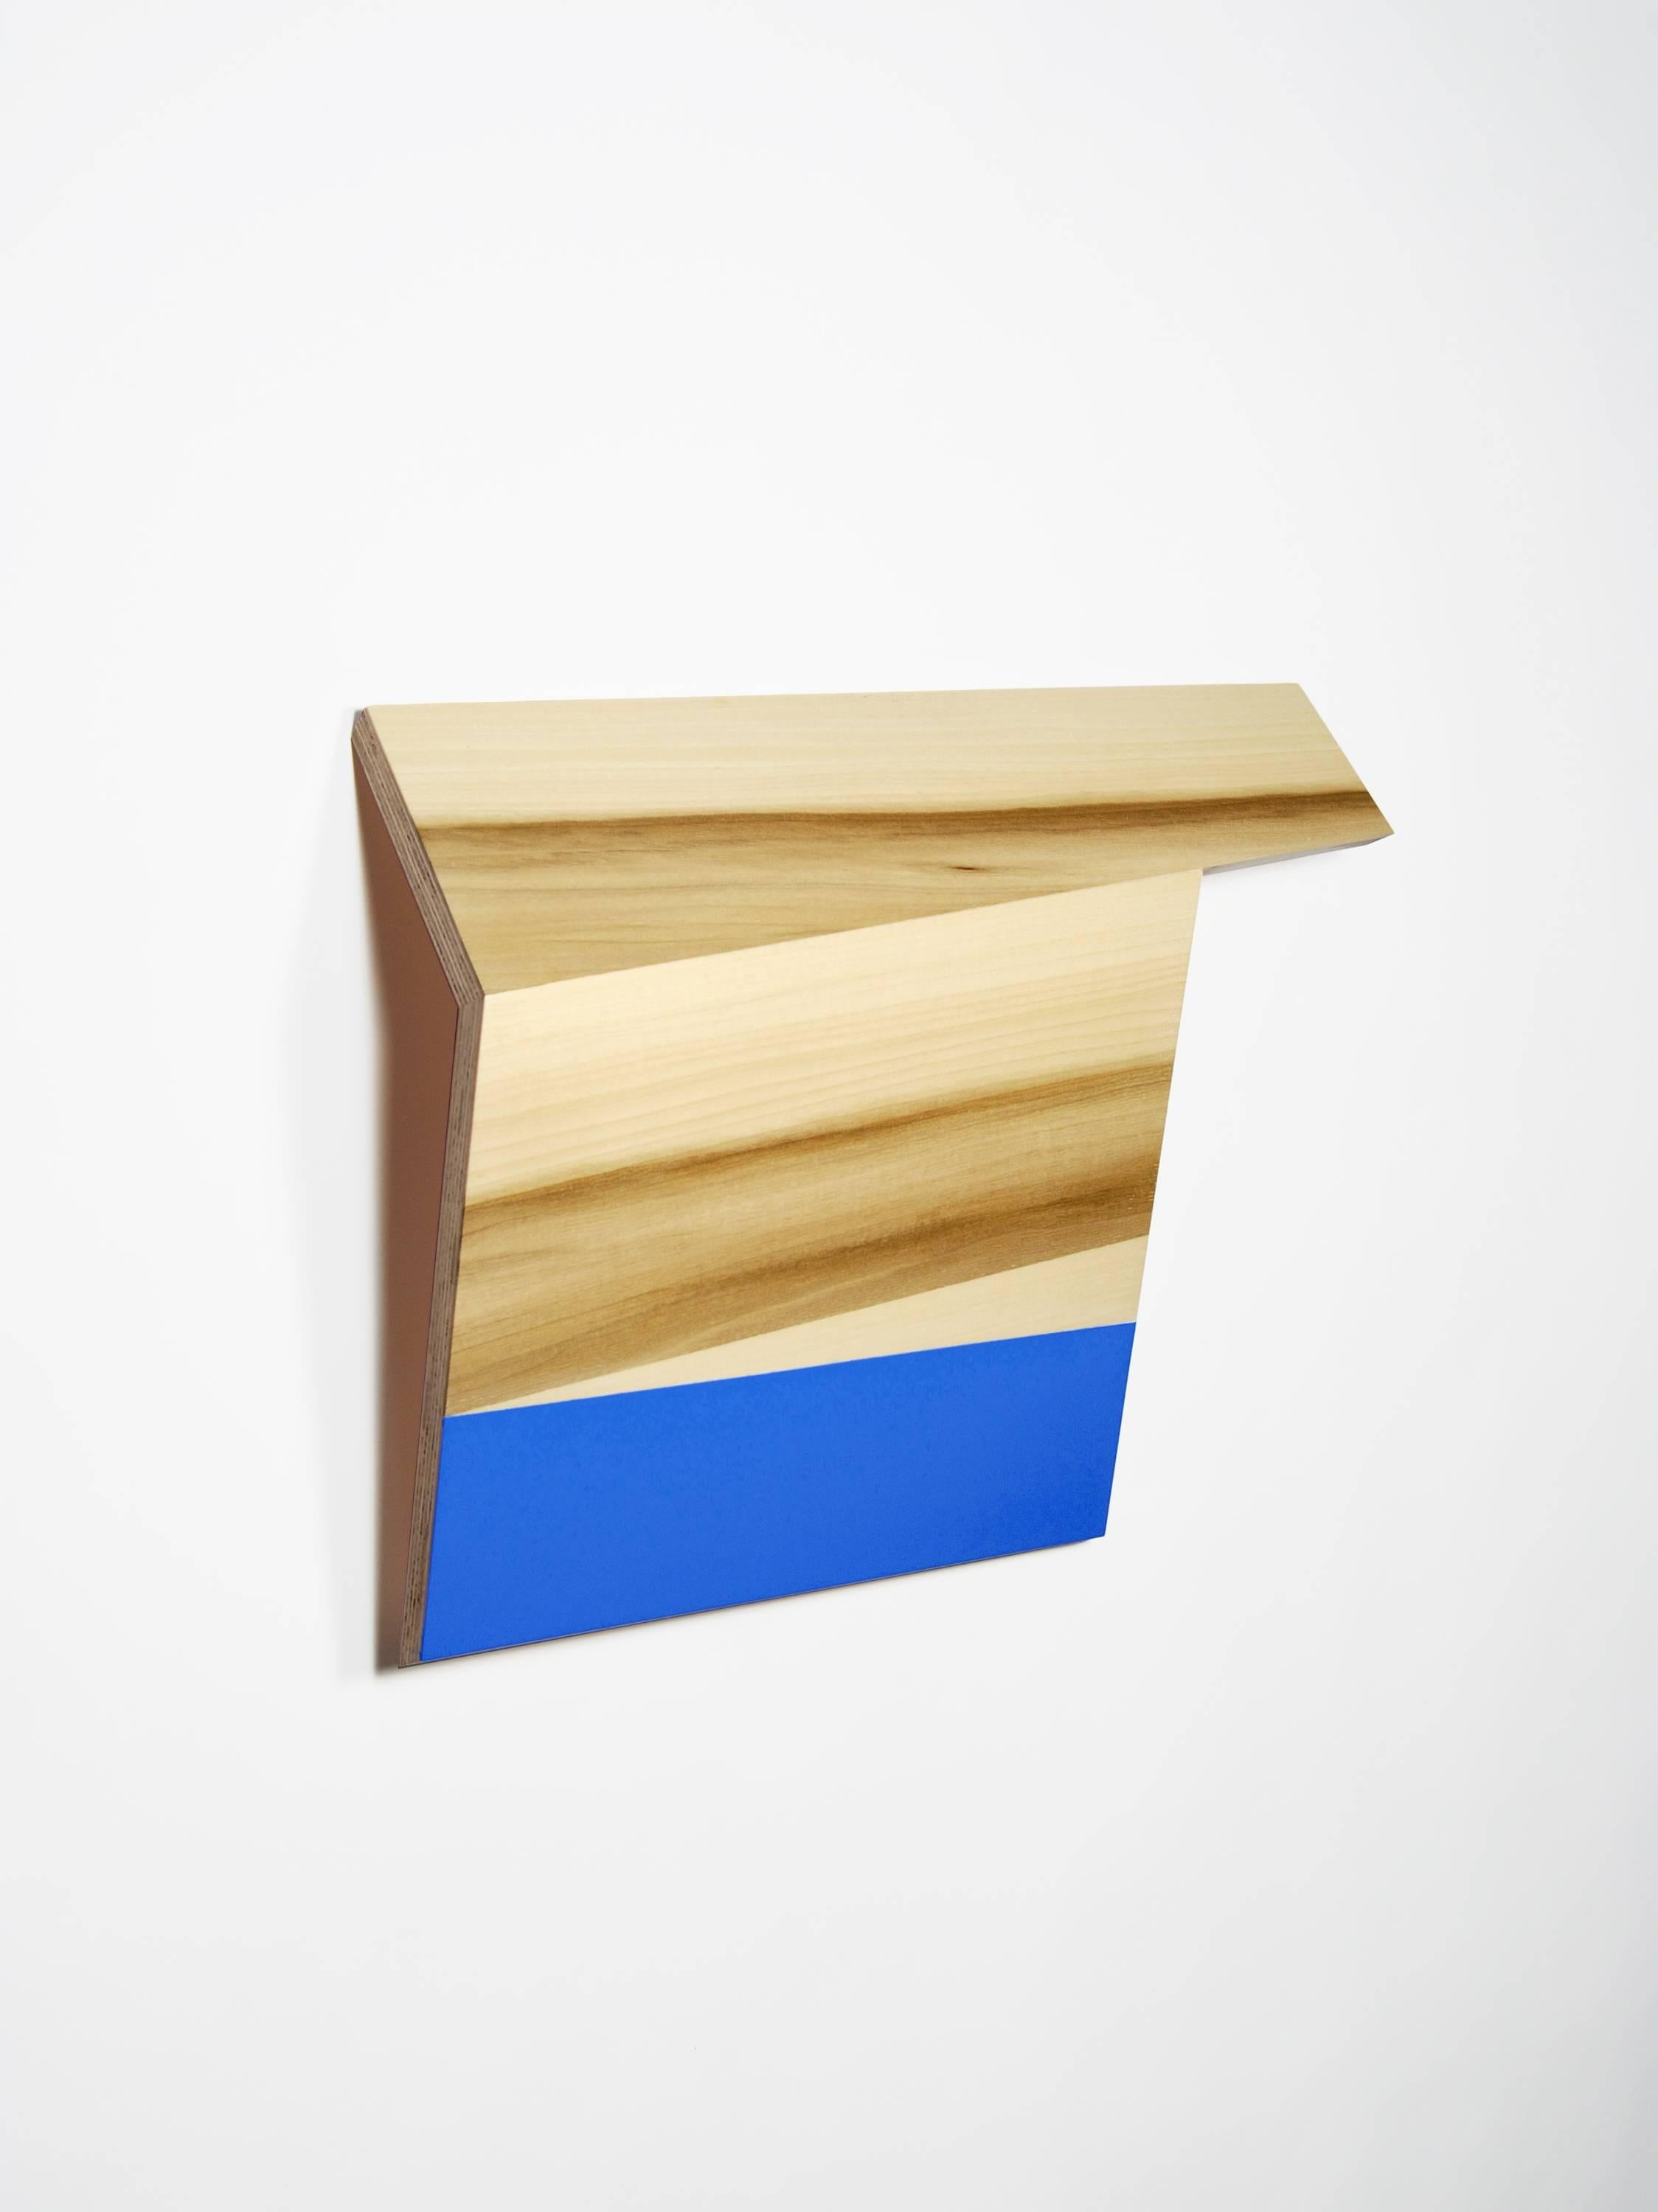 Architecture, functional objects and the human gestures that occur when interacting with these structures inform the vocabulary of Richard Bottwin’s sculpture.  The plywood surfaces, laminated with wood veneers or painted with acrylic colors, are